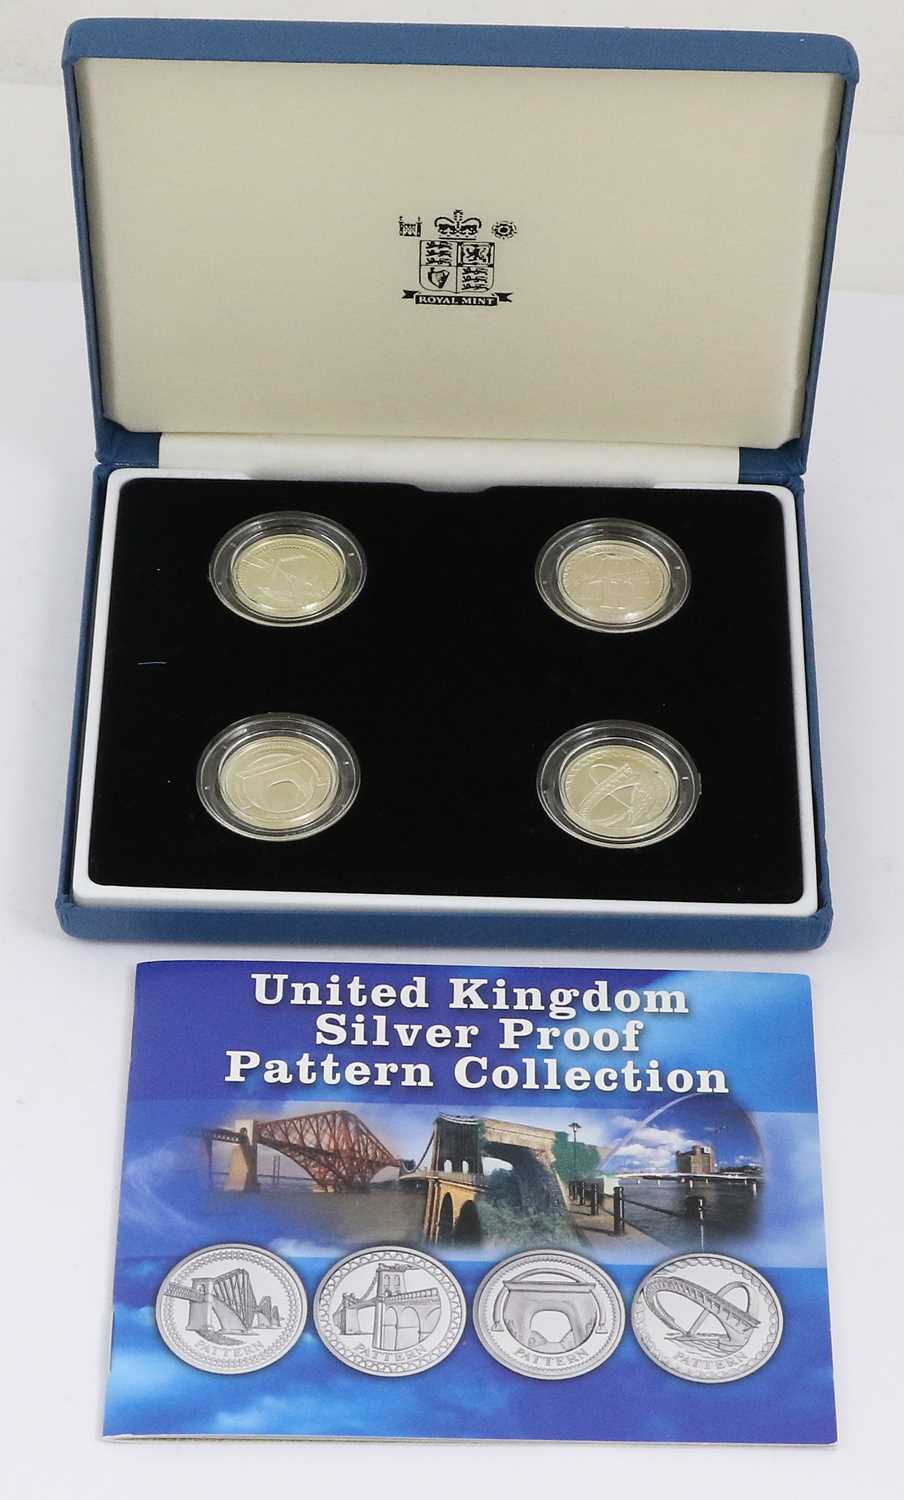 Mixed Silver Proof, Commemorative Coinage and Sets, comprising: UK Silver Proof Pattern £1